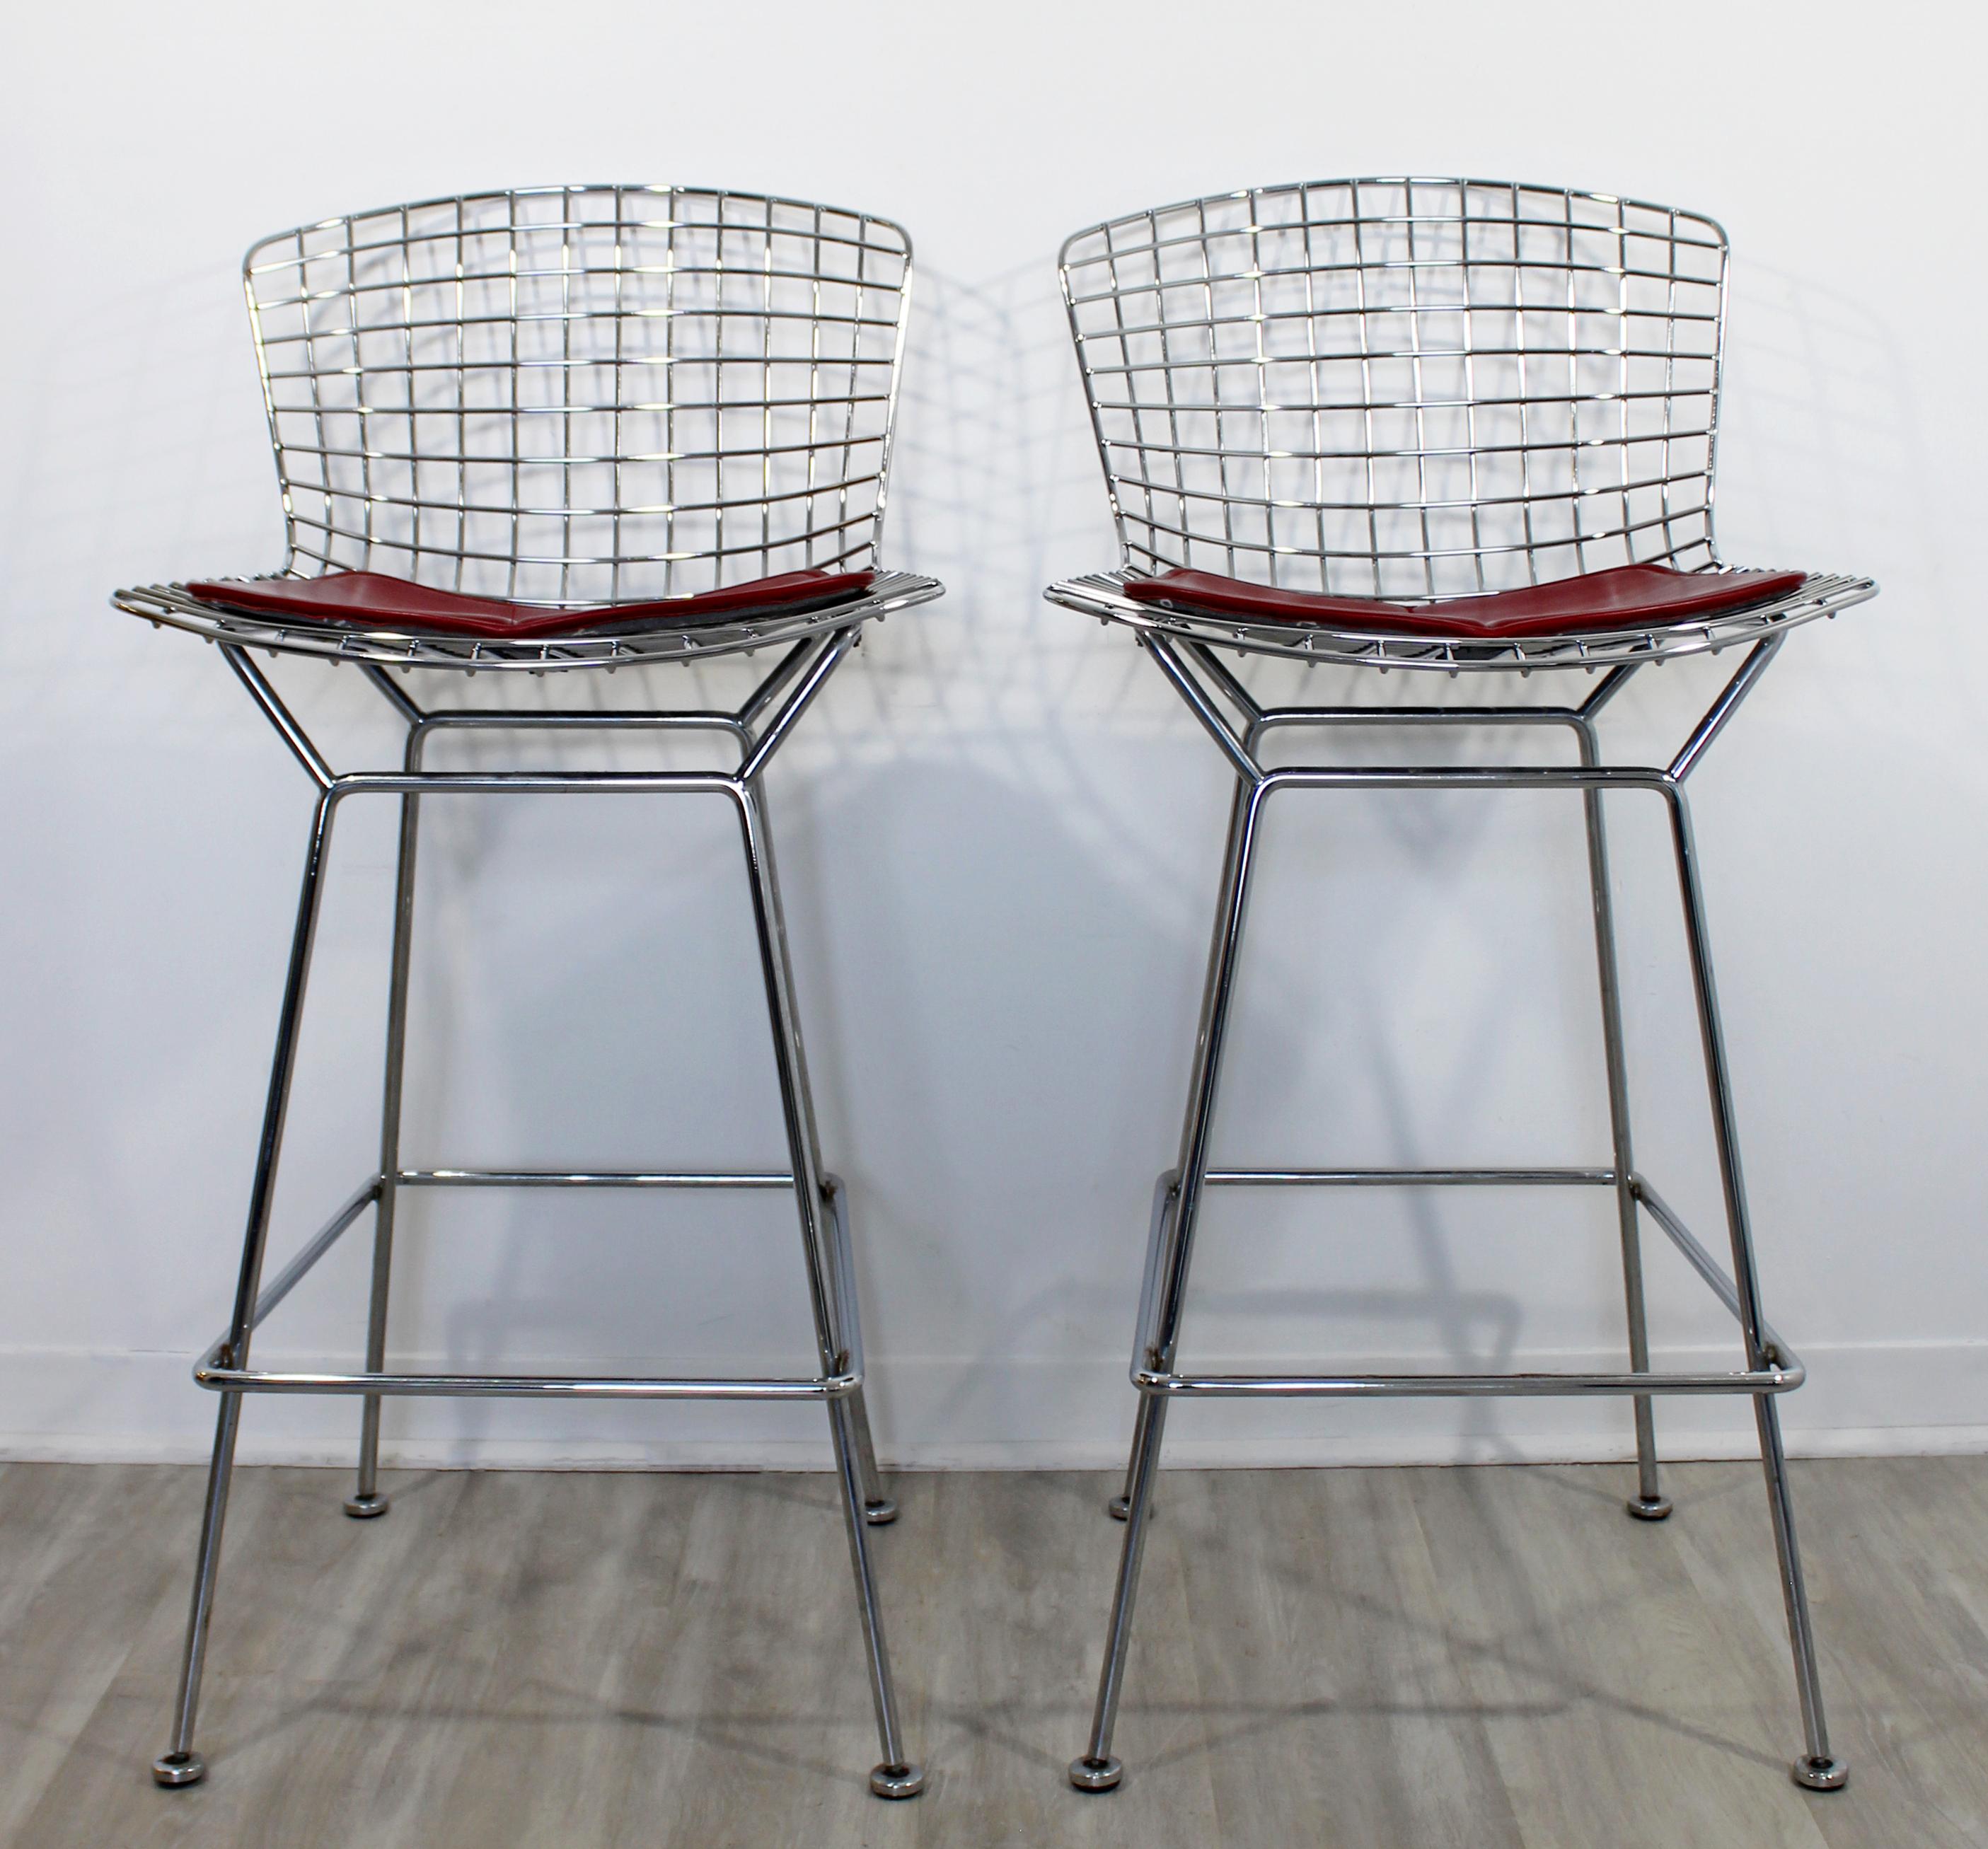 For your consideration is an industrial style, pair of chrome wire bar stools, with red seats, by Knoll, circa the 1970s. In excellent vintage condition. The dimensions are 21